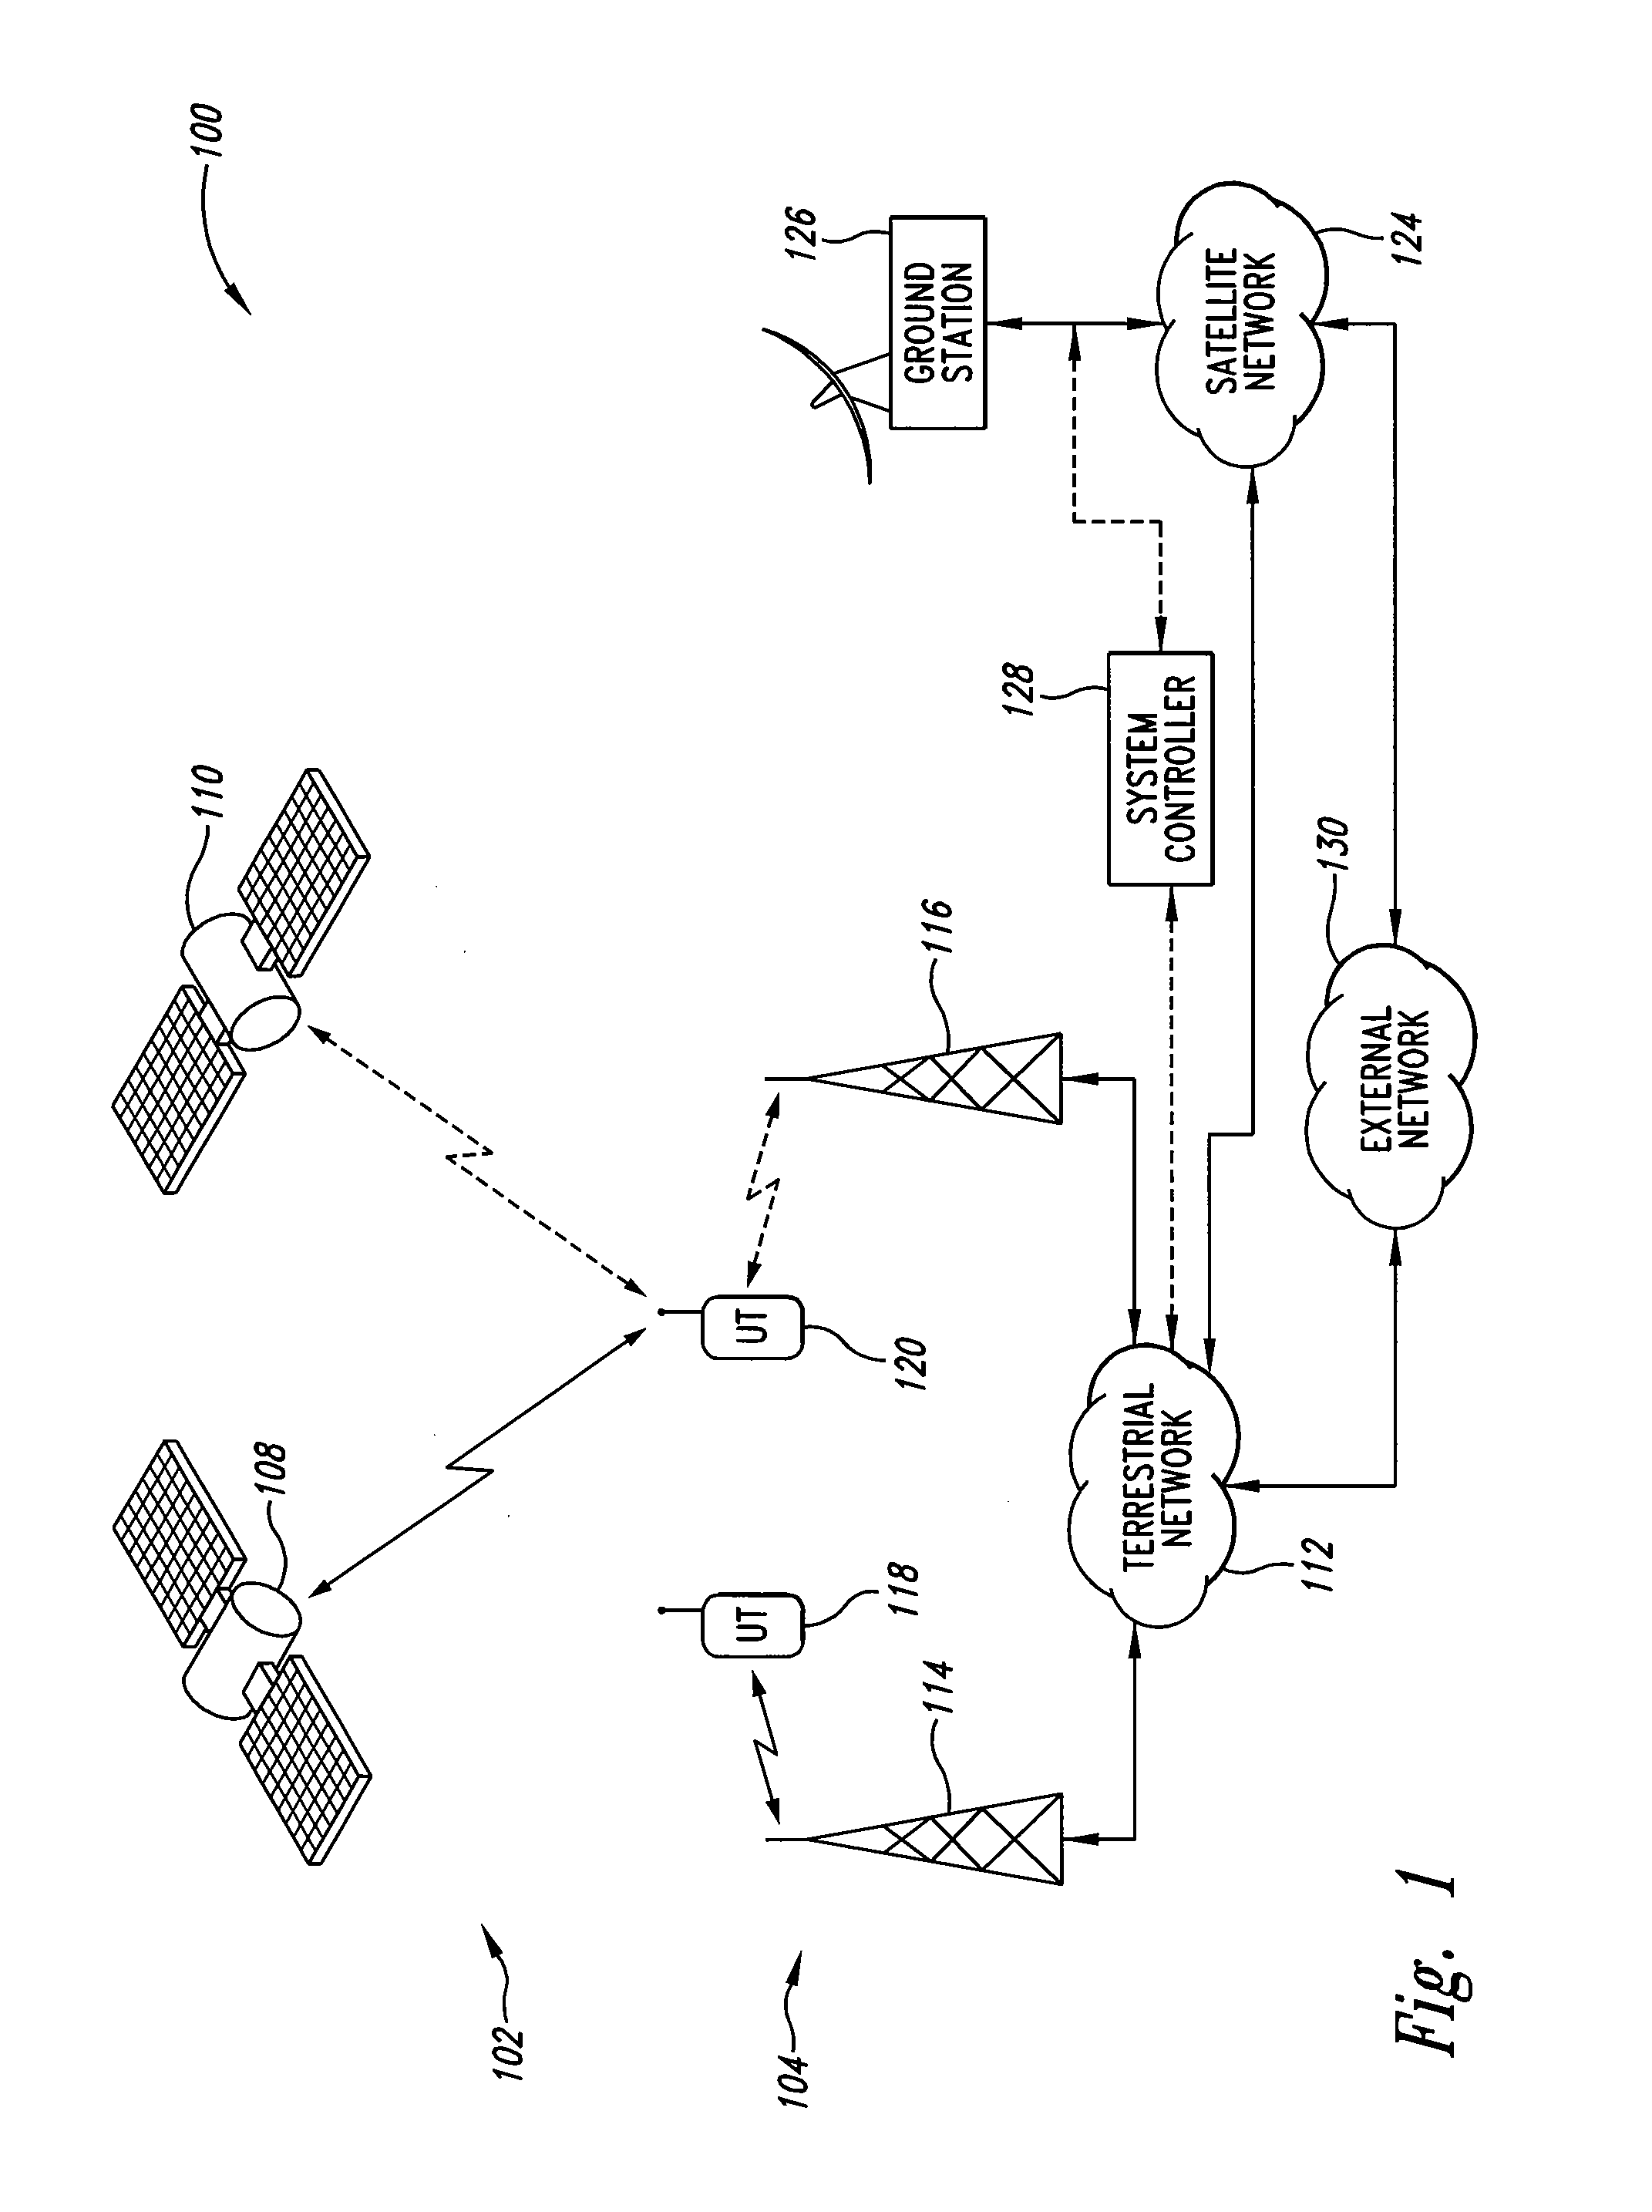 System and method for communication utilizing time division duplexing